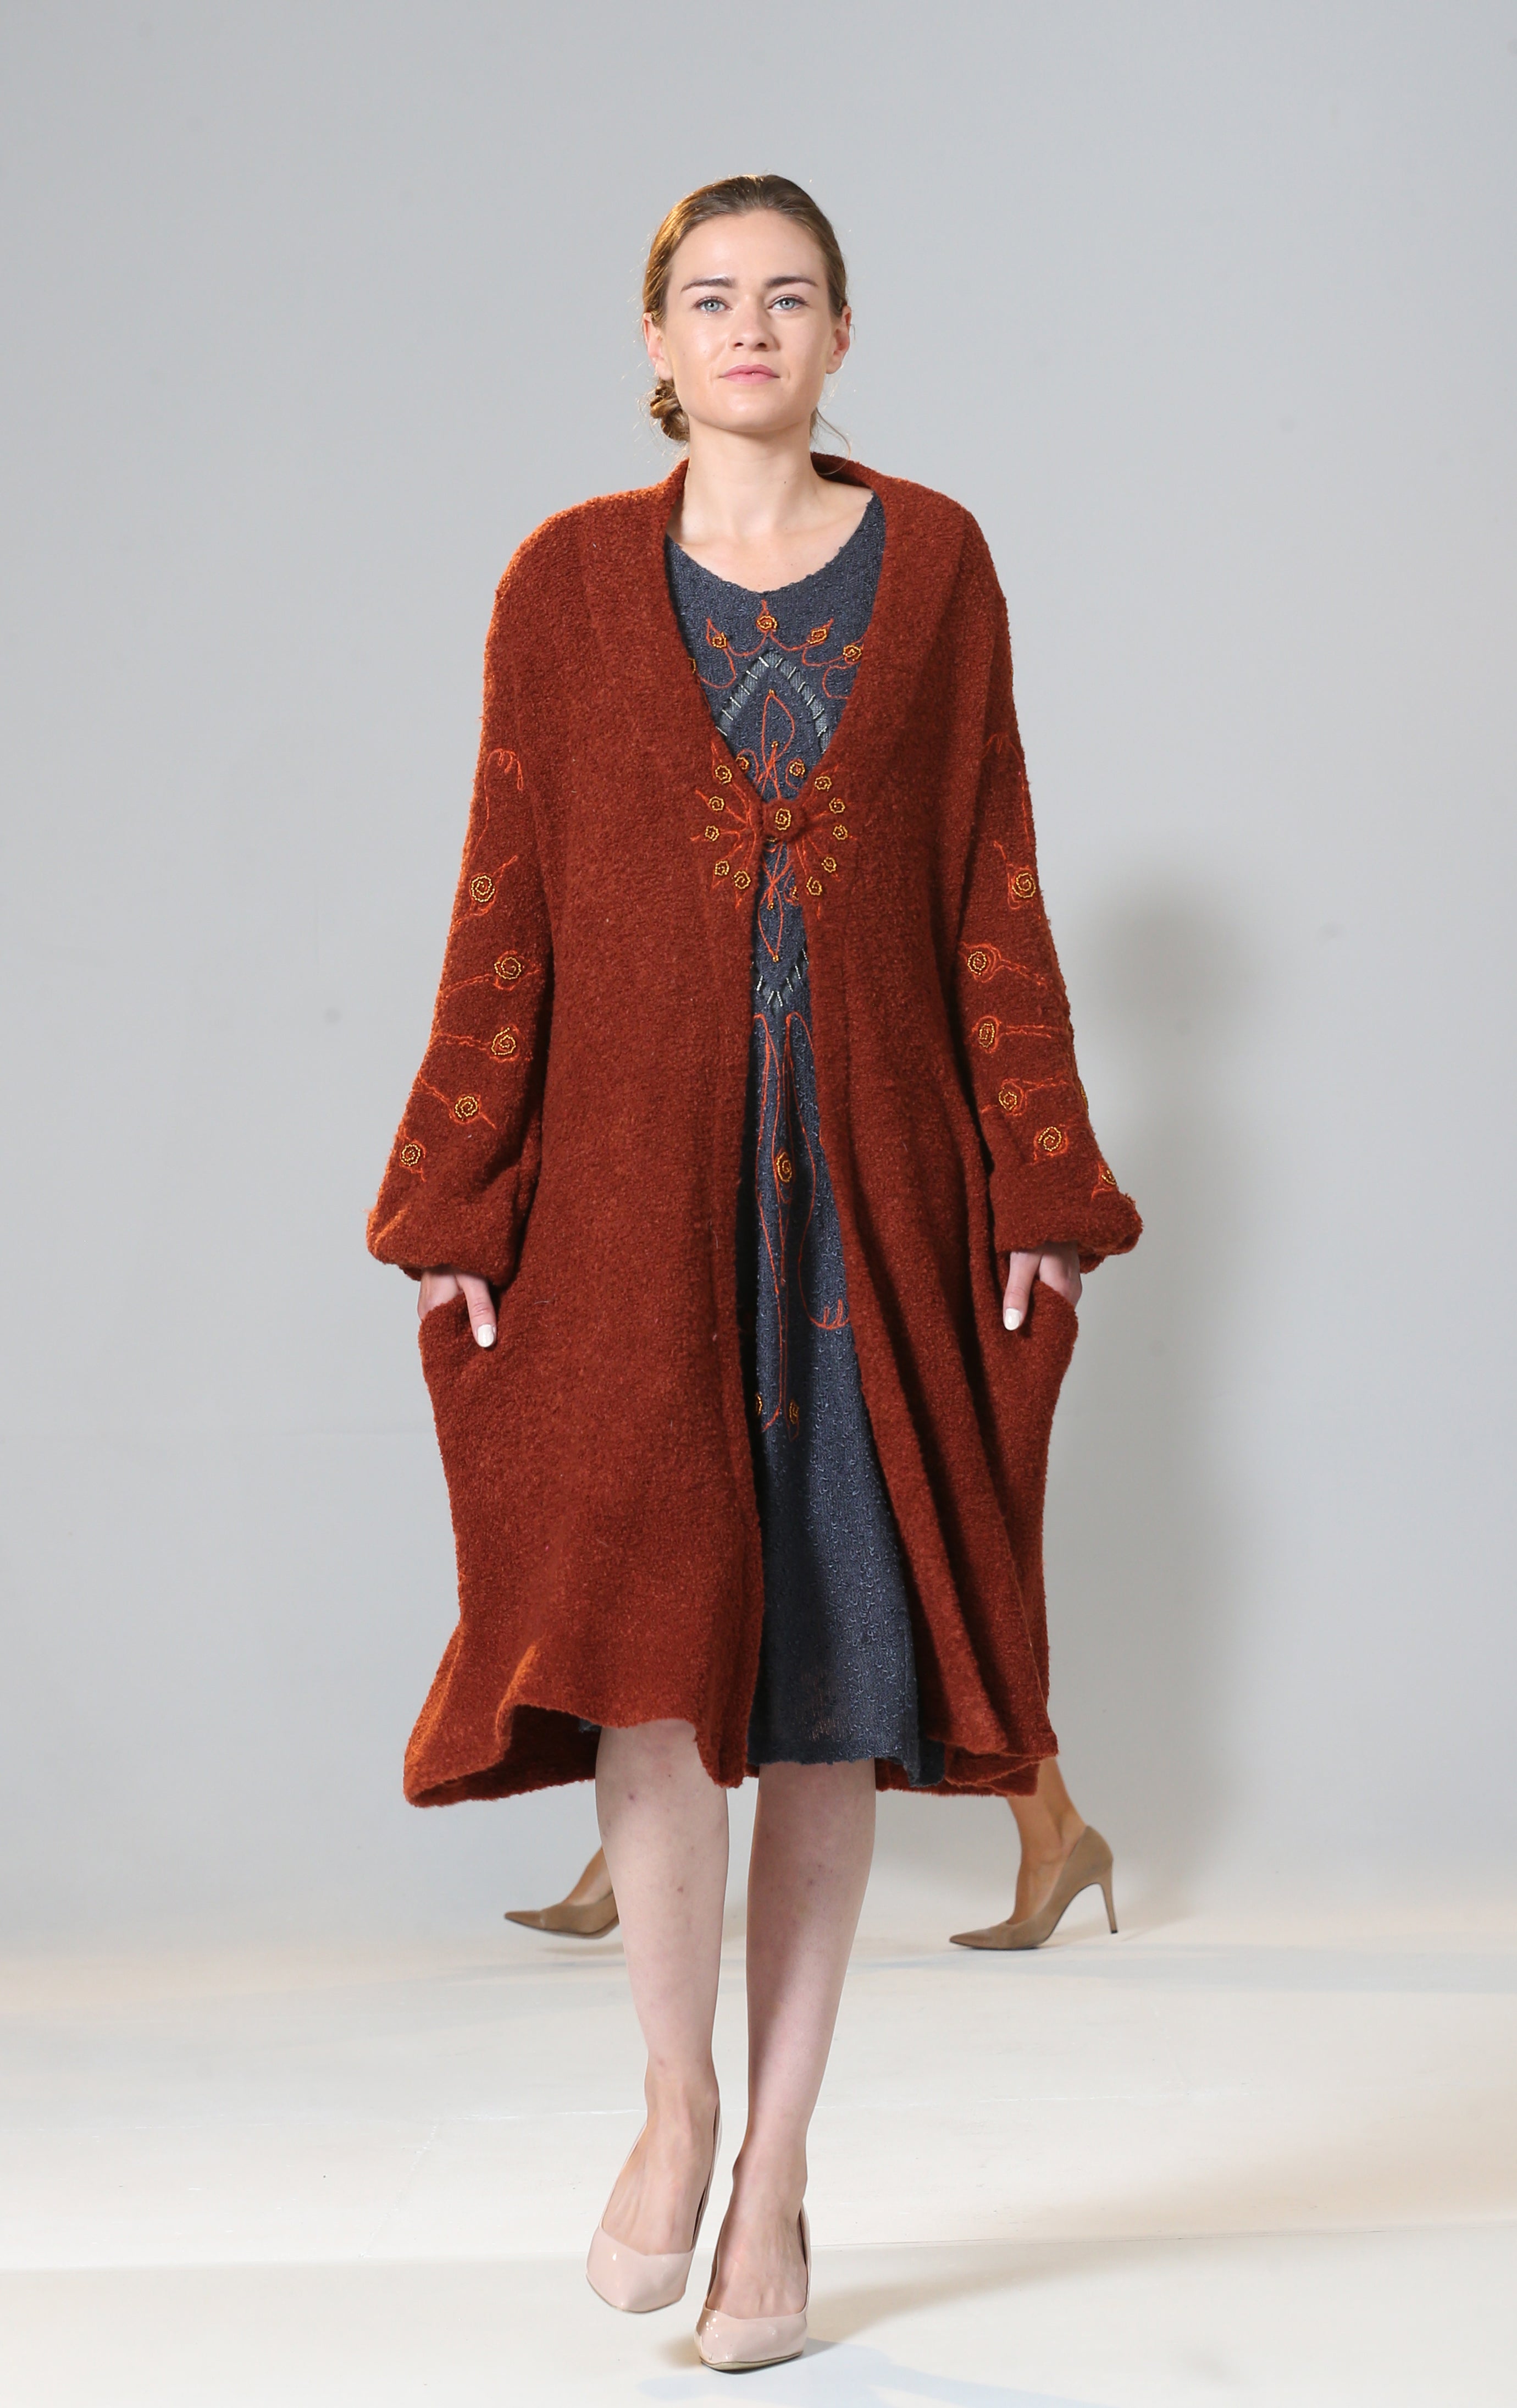 CAROLINE MITCHELL - KNITTED COAT - PRICE ON APPLICATION